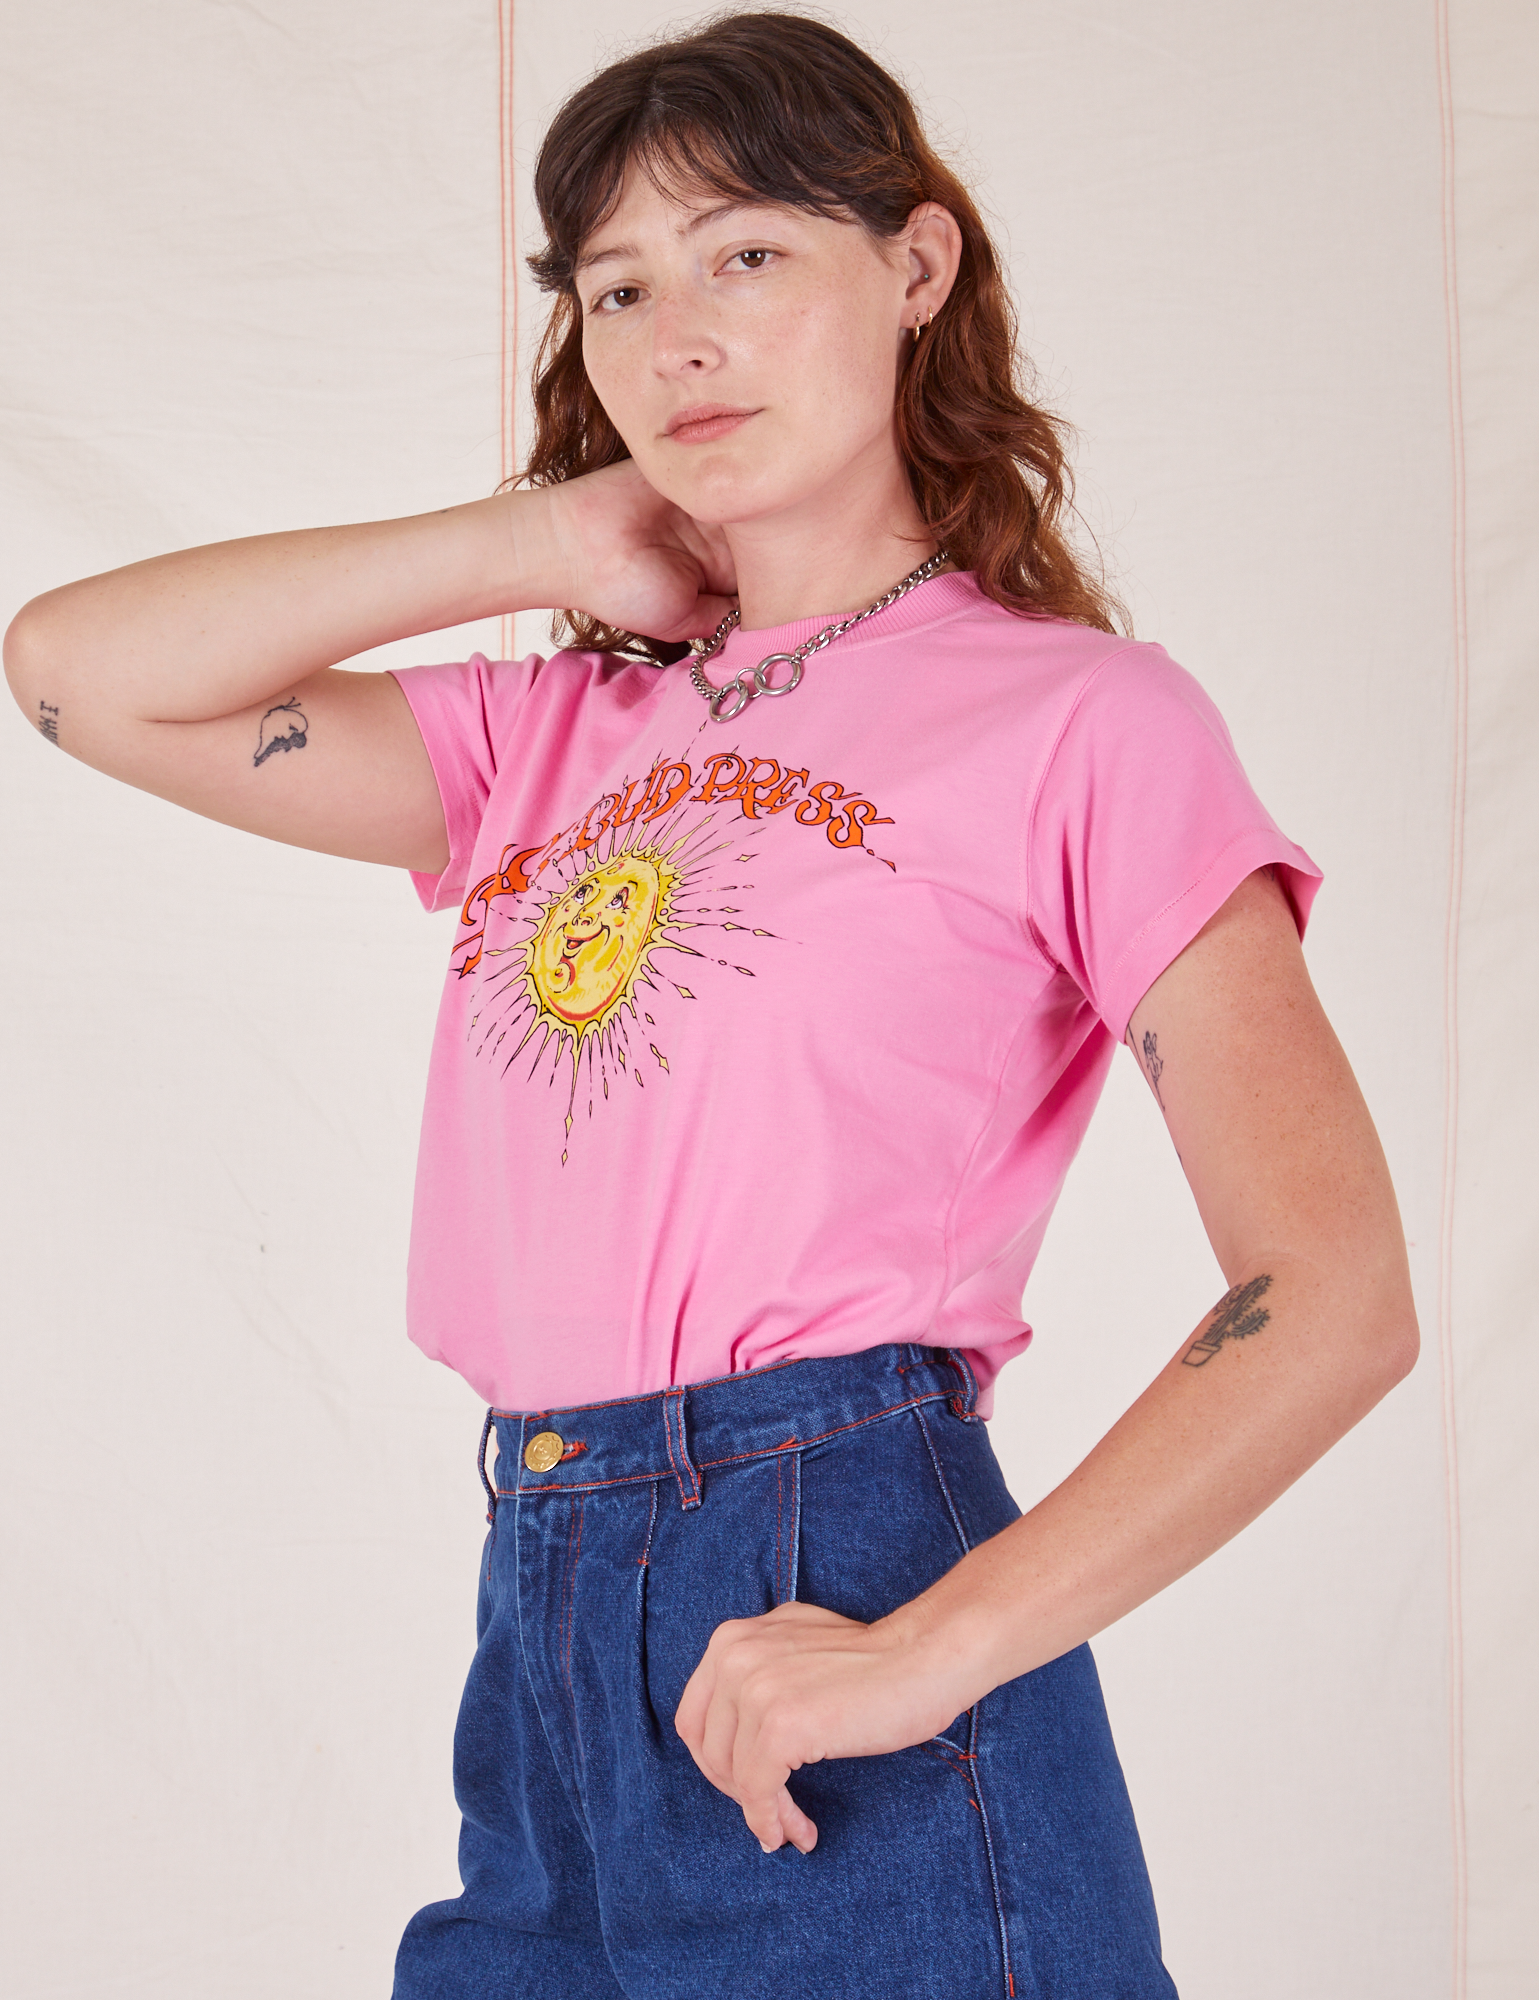 Sun Baby Organic Tee in Bubblegum Pink angled front view on Alex